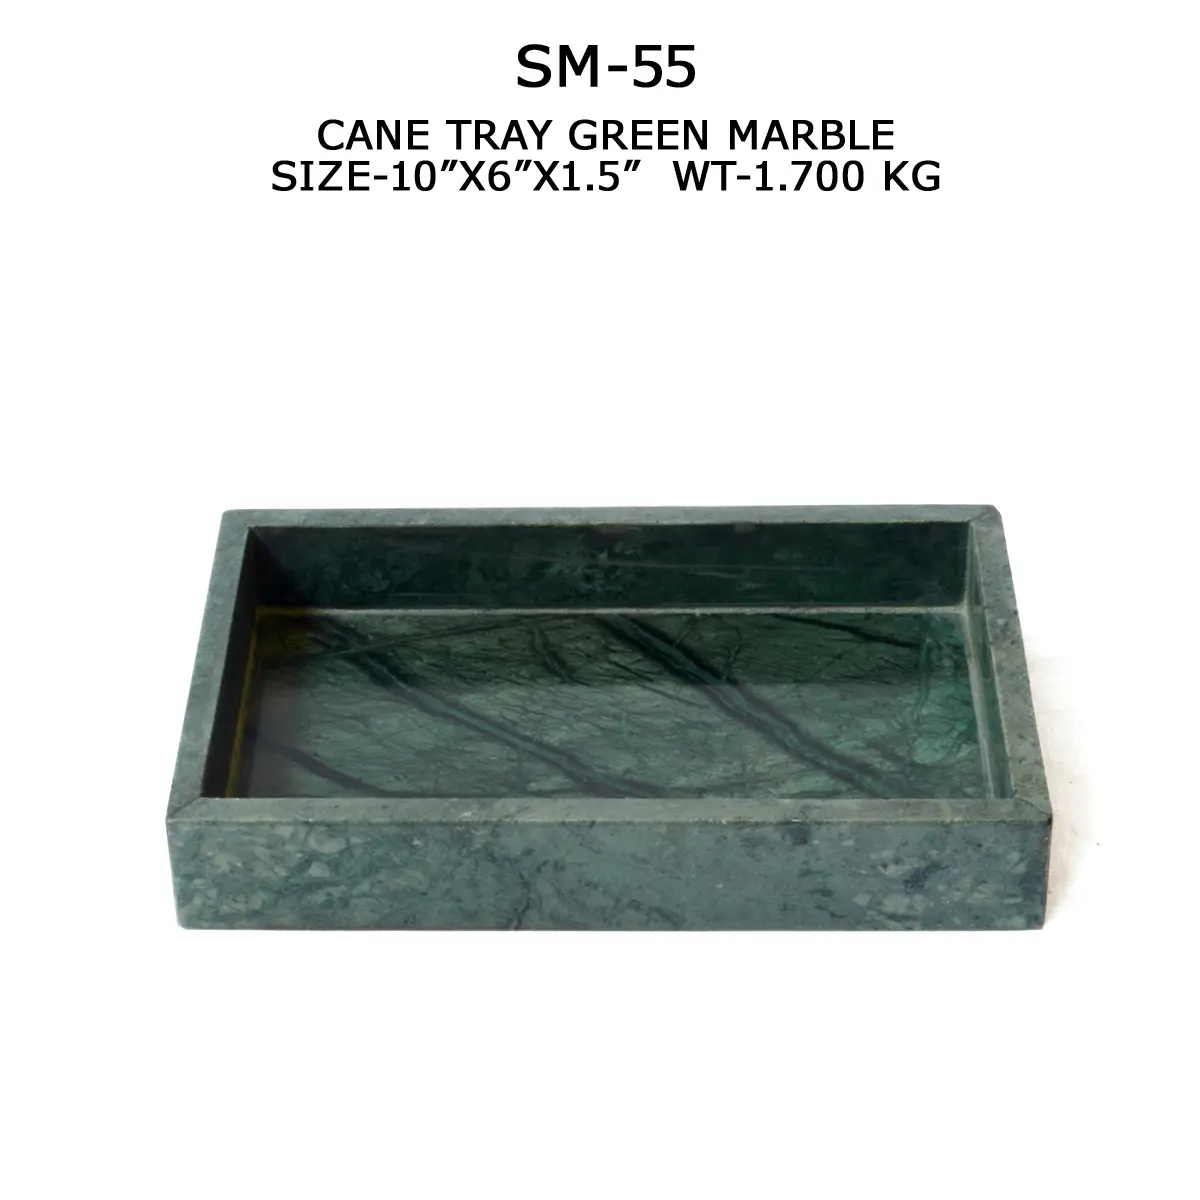 CANE TRAY GREEN MARBLE